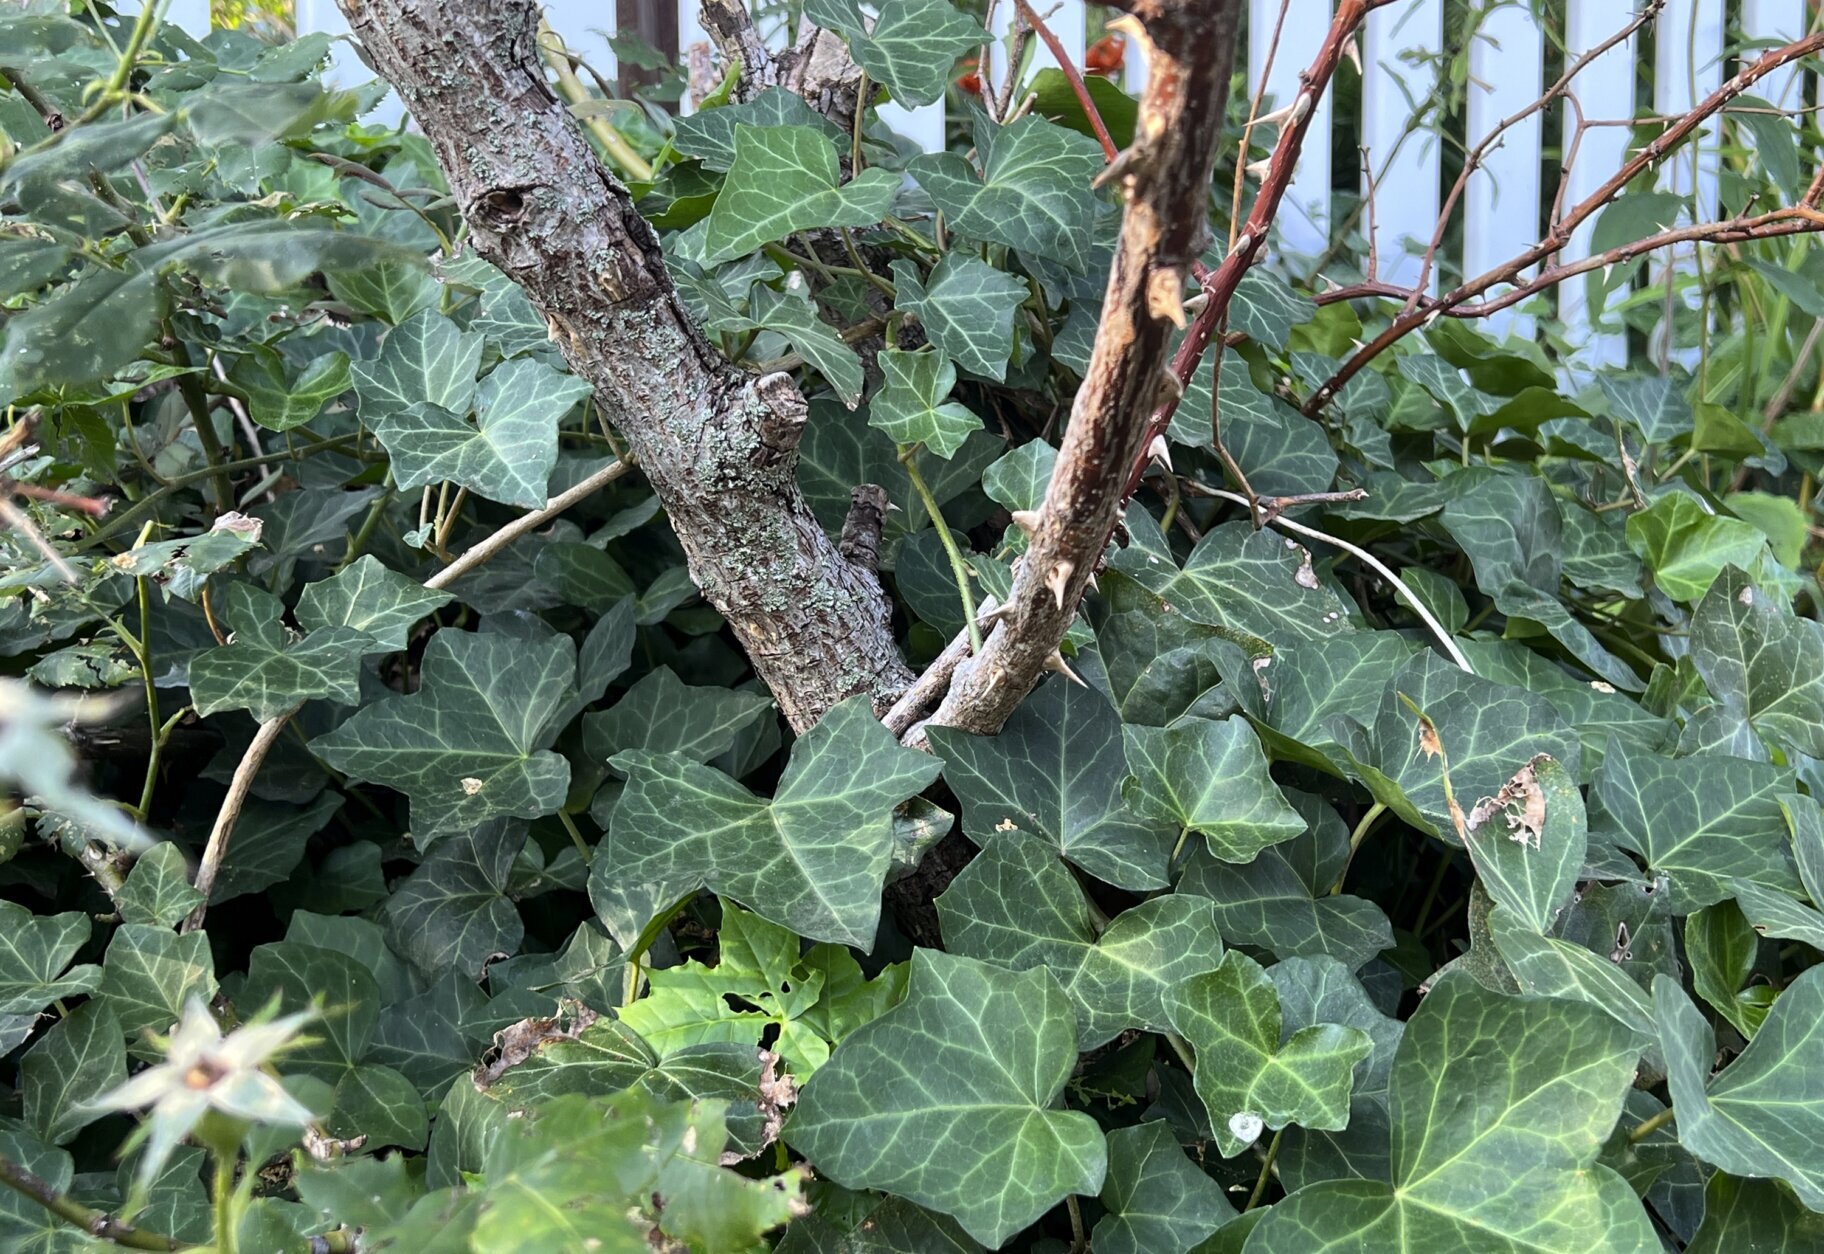 Invasive and ubiquitous, English ivy can hurt trees and plants ...